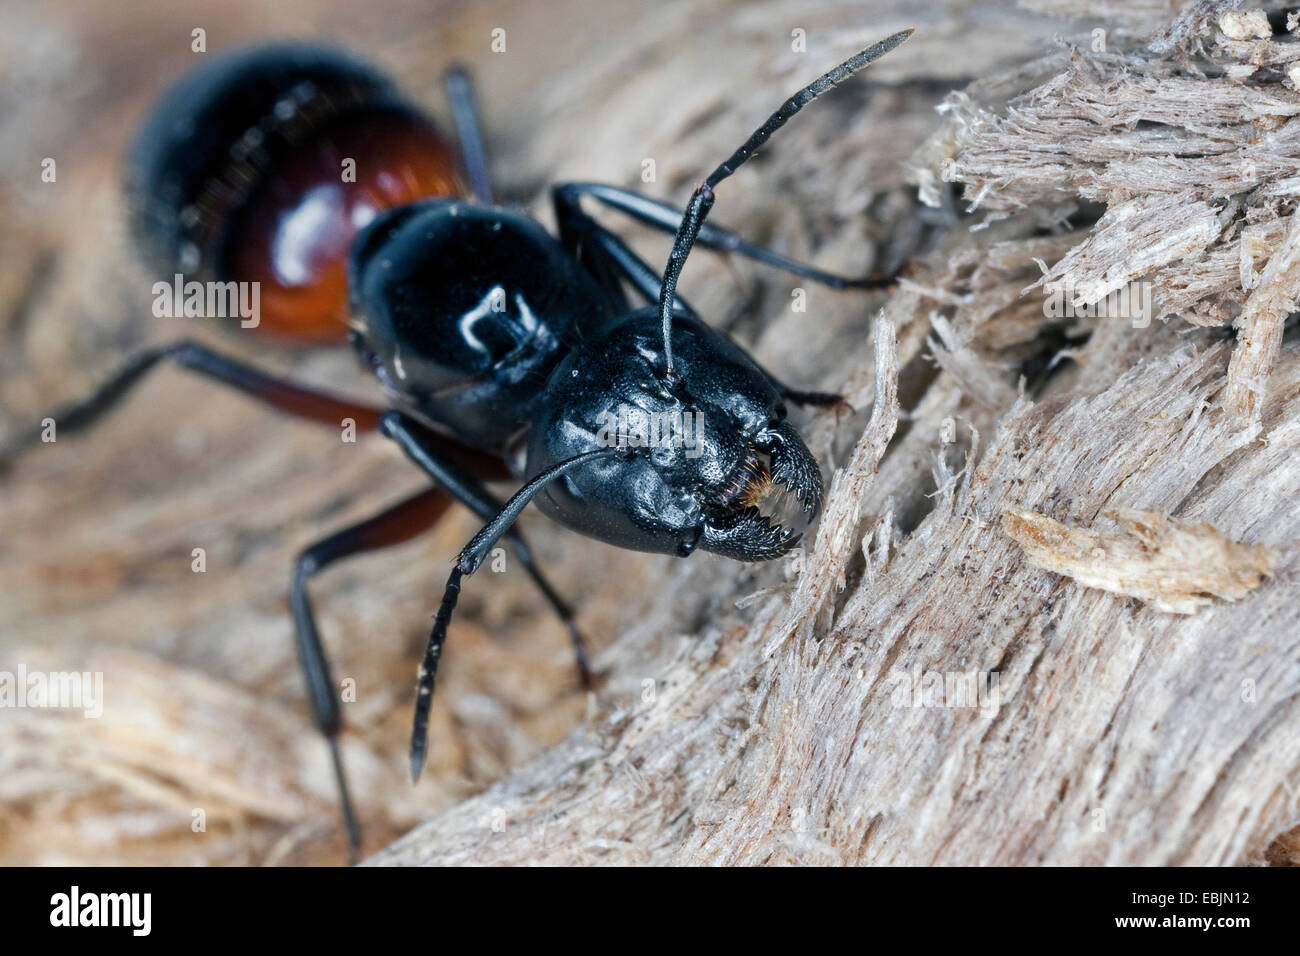 Carpenter ant (Camponotus ligniperdus, Camponotus ligniperda), queen feeding on rotting wood, Germany Stock Photo